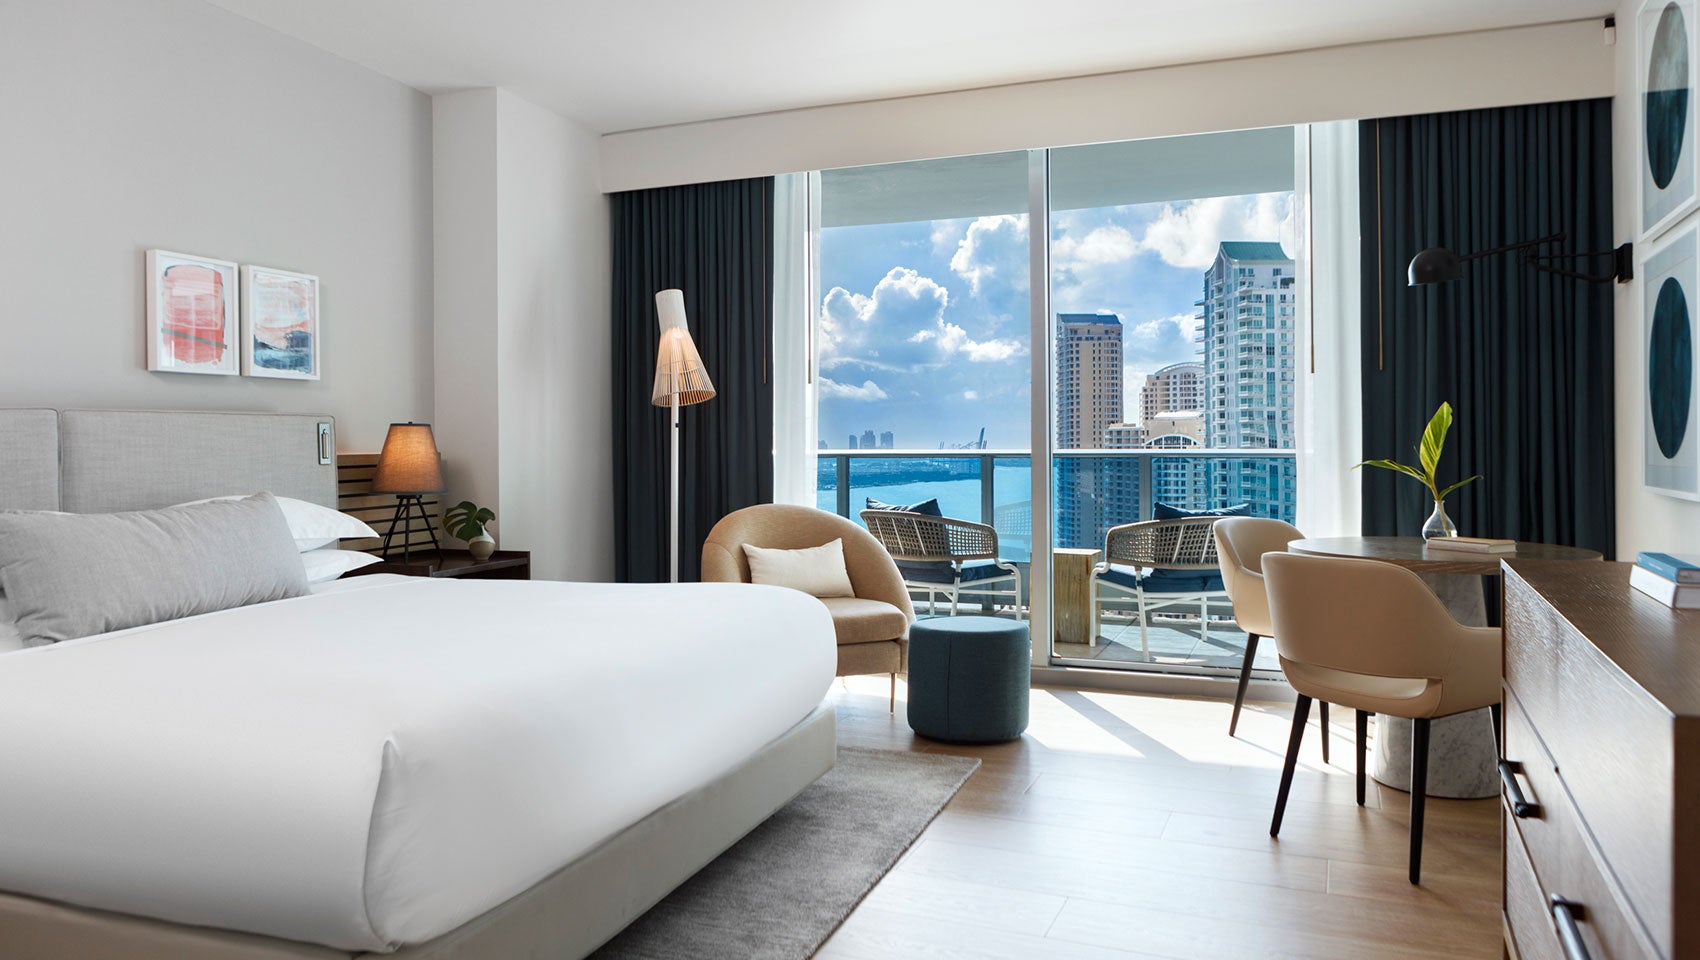 Current hotel promotions with Hilton, Marriott, IHG and more